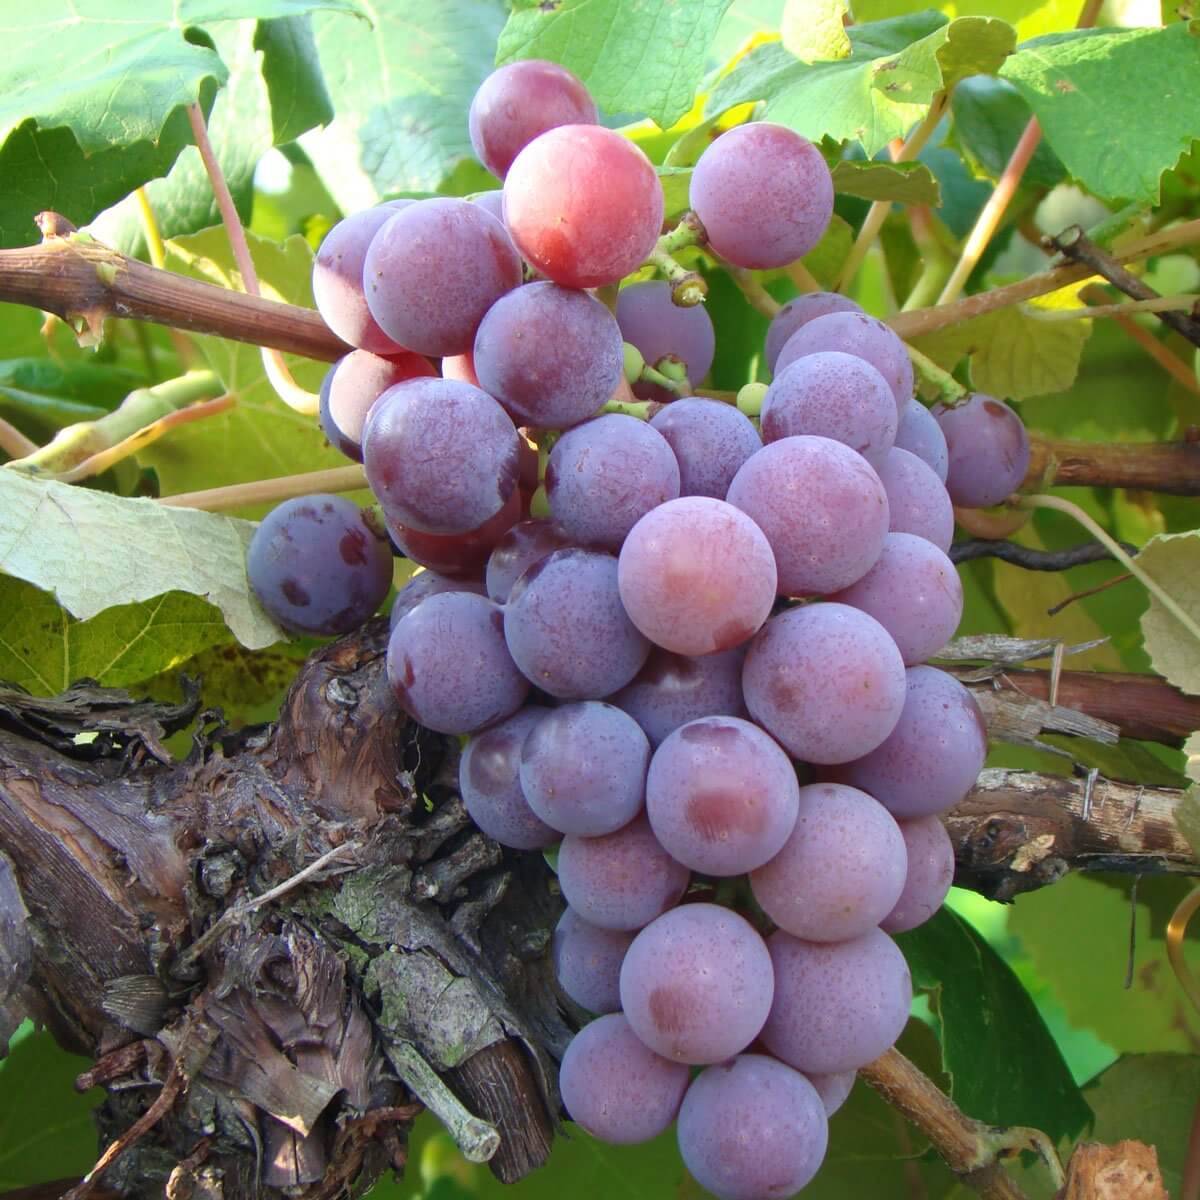 A close-up of a single bunch of purple Catawba grapes on the vine with green leaves and brown stems.